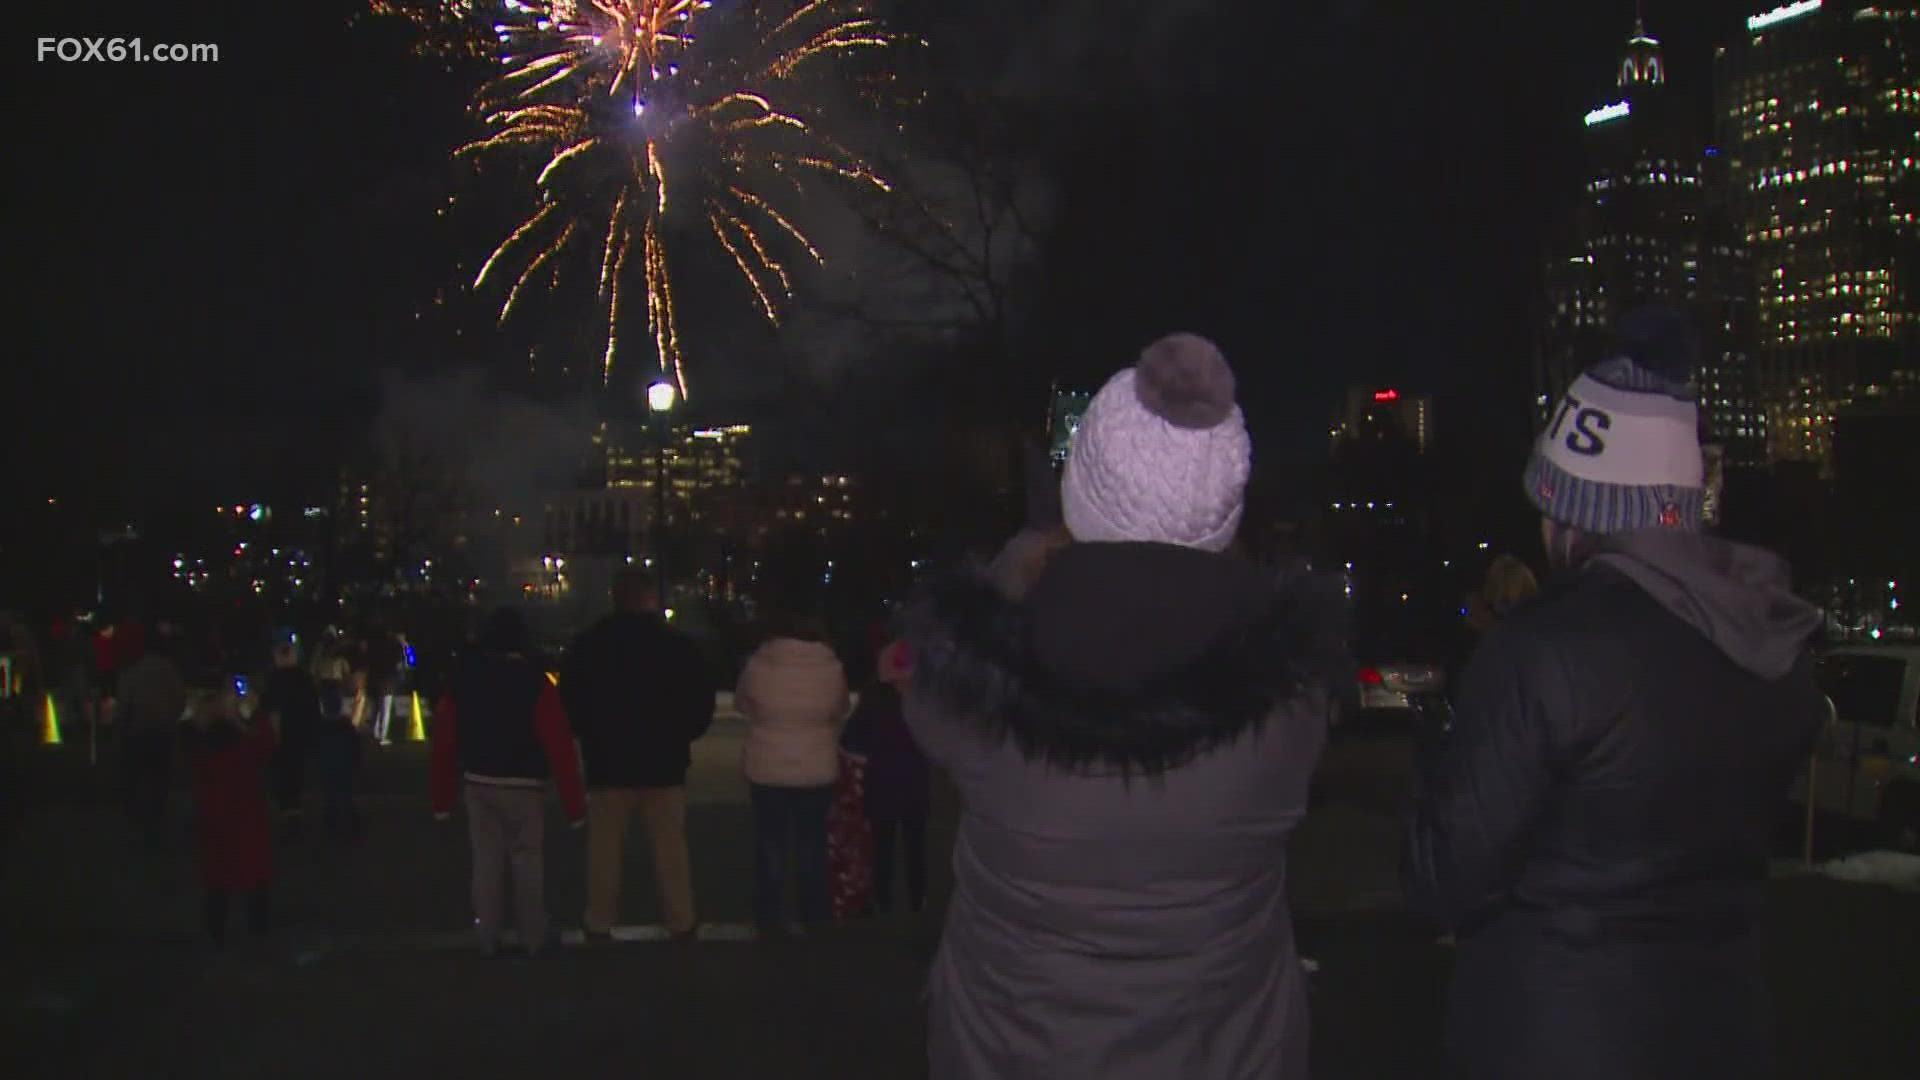 The New Year's Eve celebration will be in person for its 33rd year.